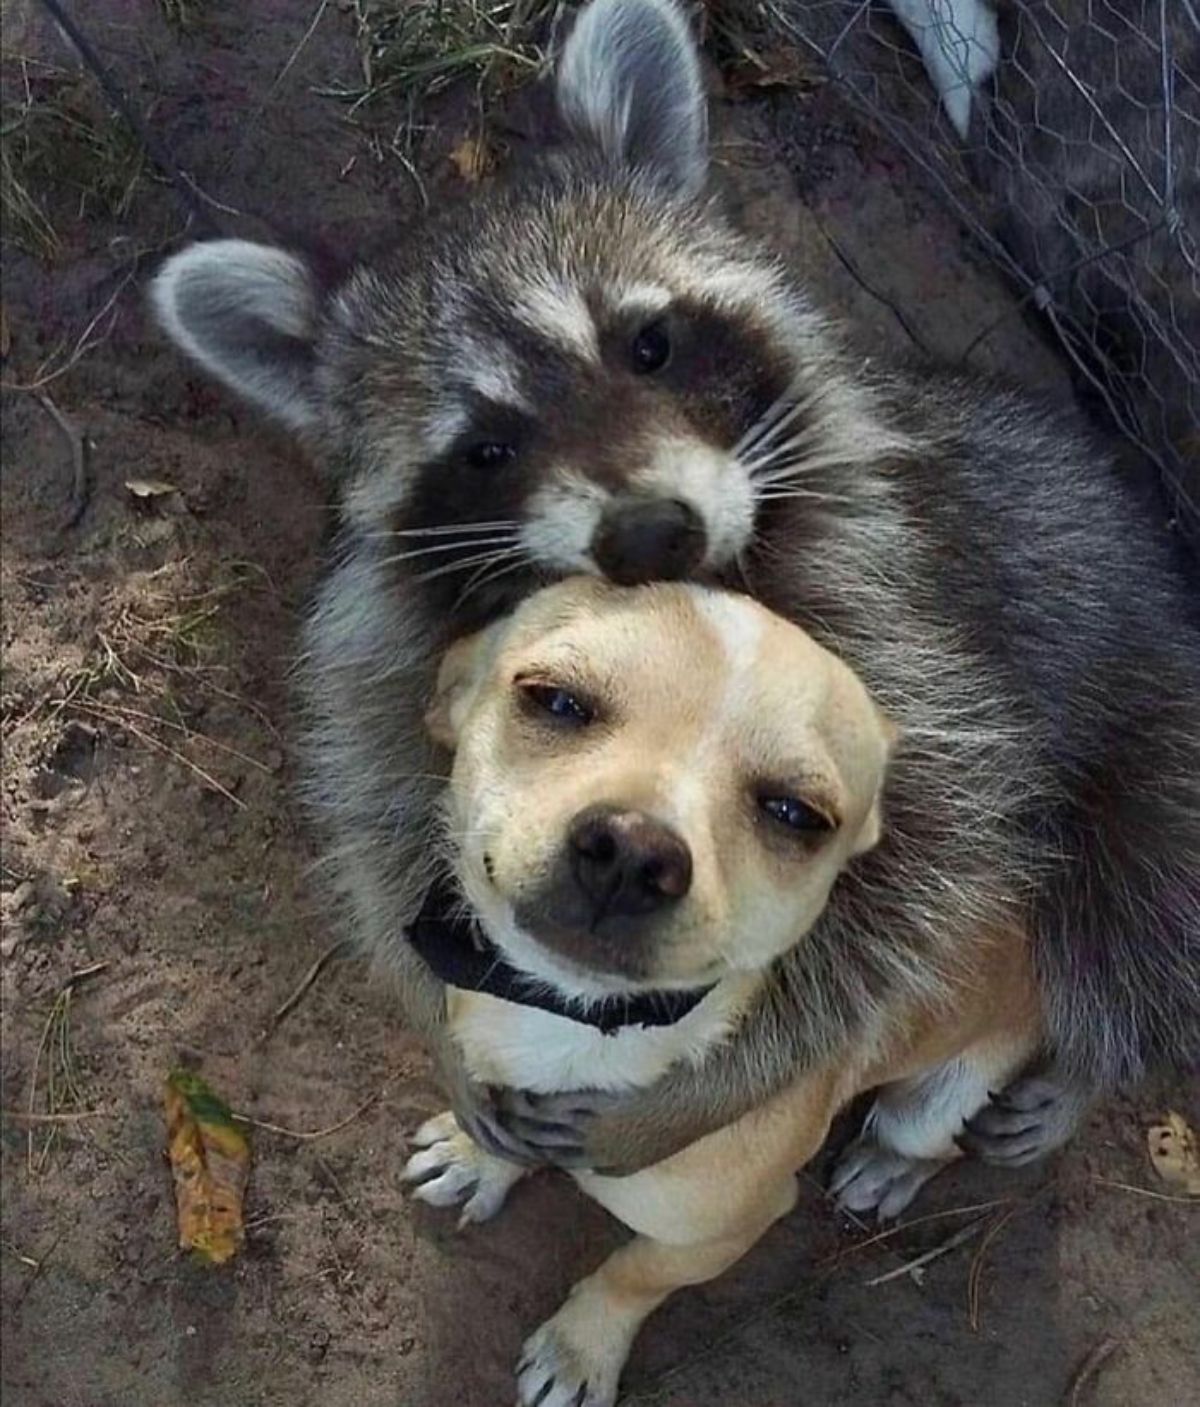 raccoon hugging a brown and white dog